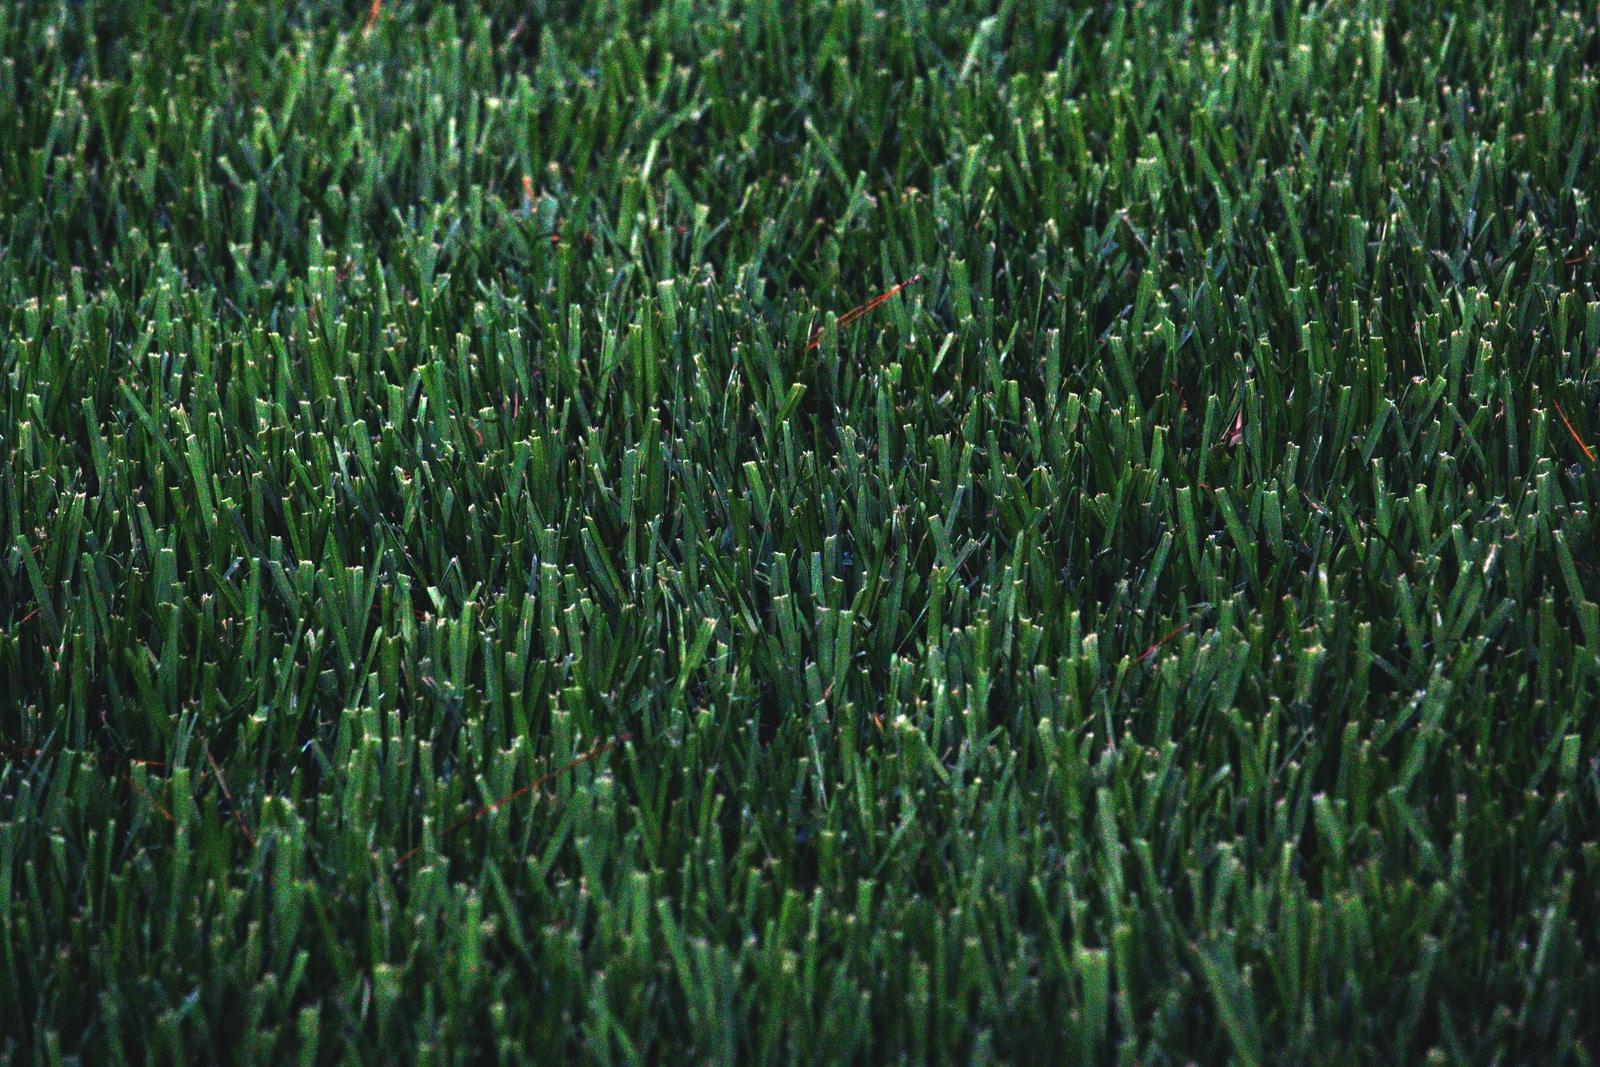 Green grass without using lawn aeration